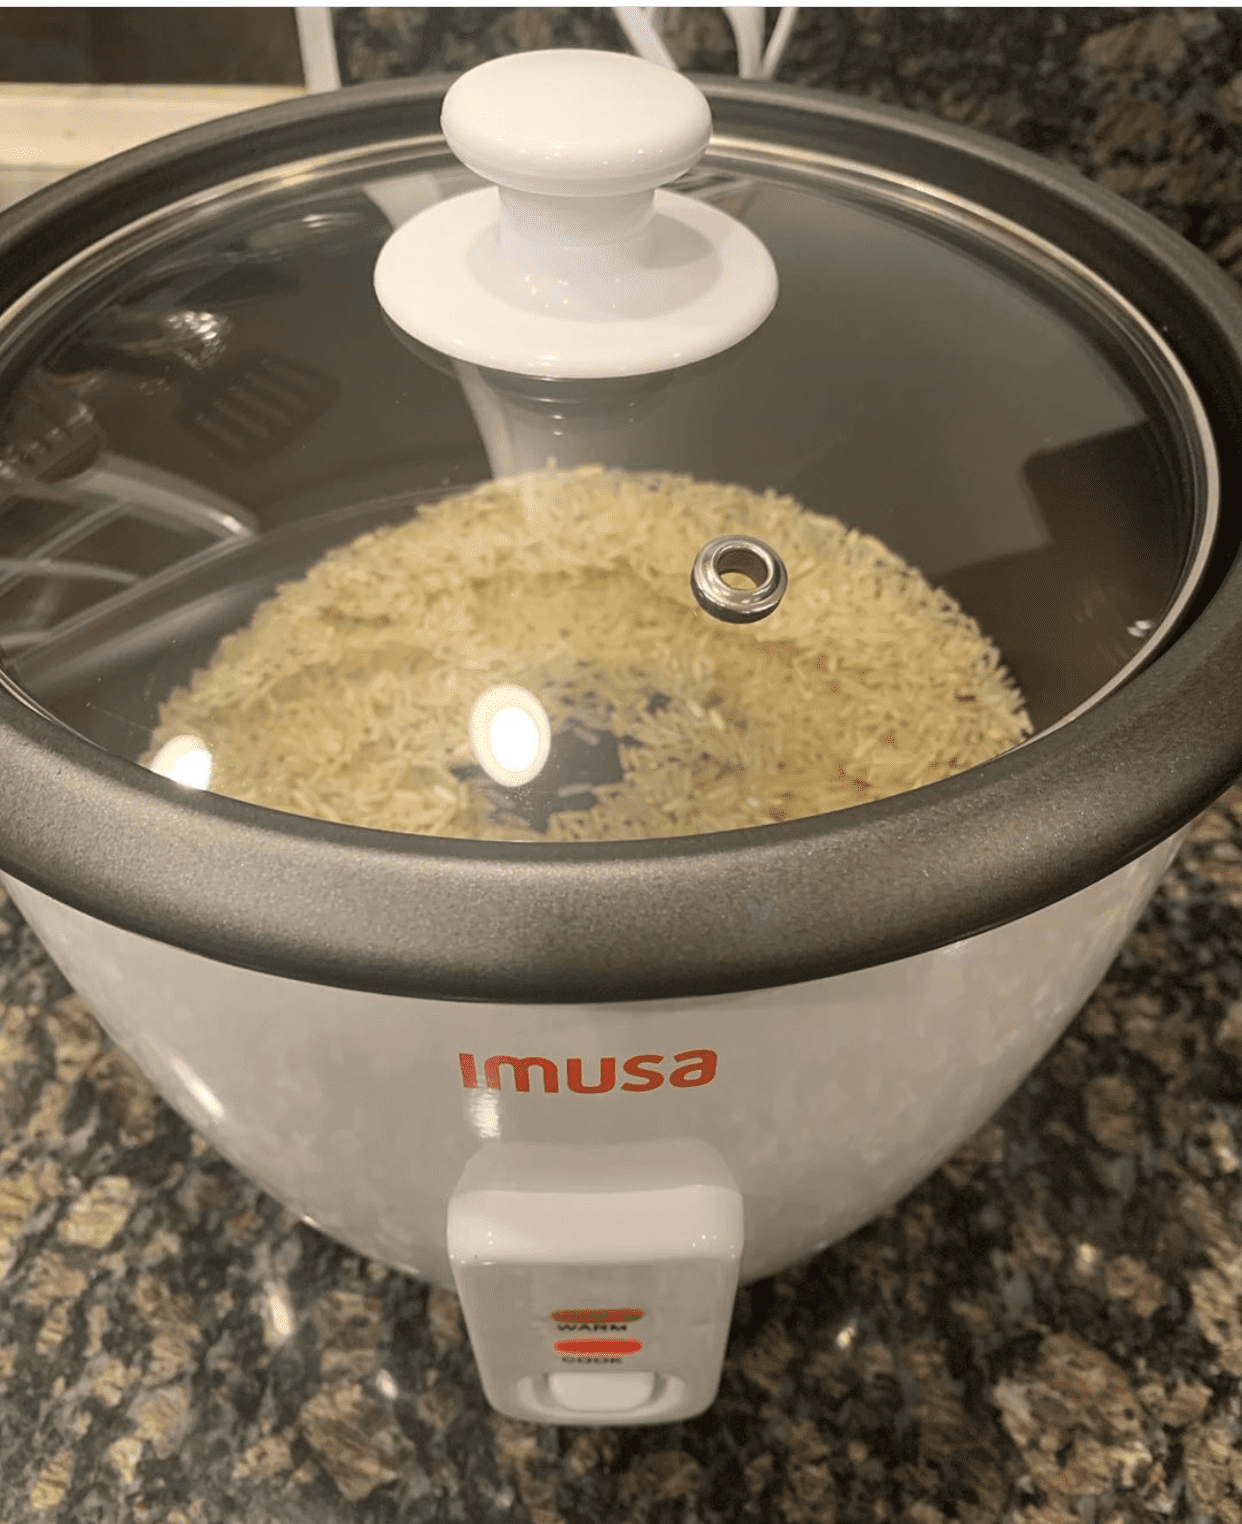 Customer Reviews: IMUSA Electric Rice Cooker with Spoon and Cup, 3 CUP -  CVS Pharmacy